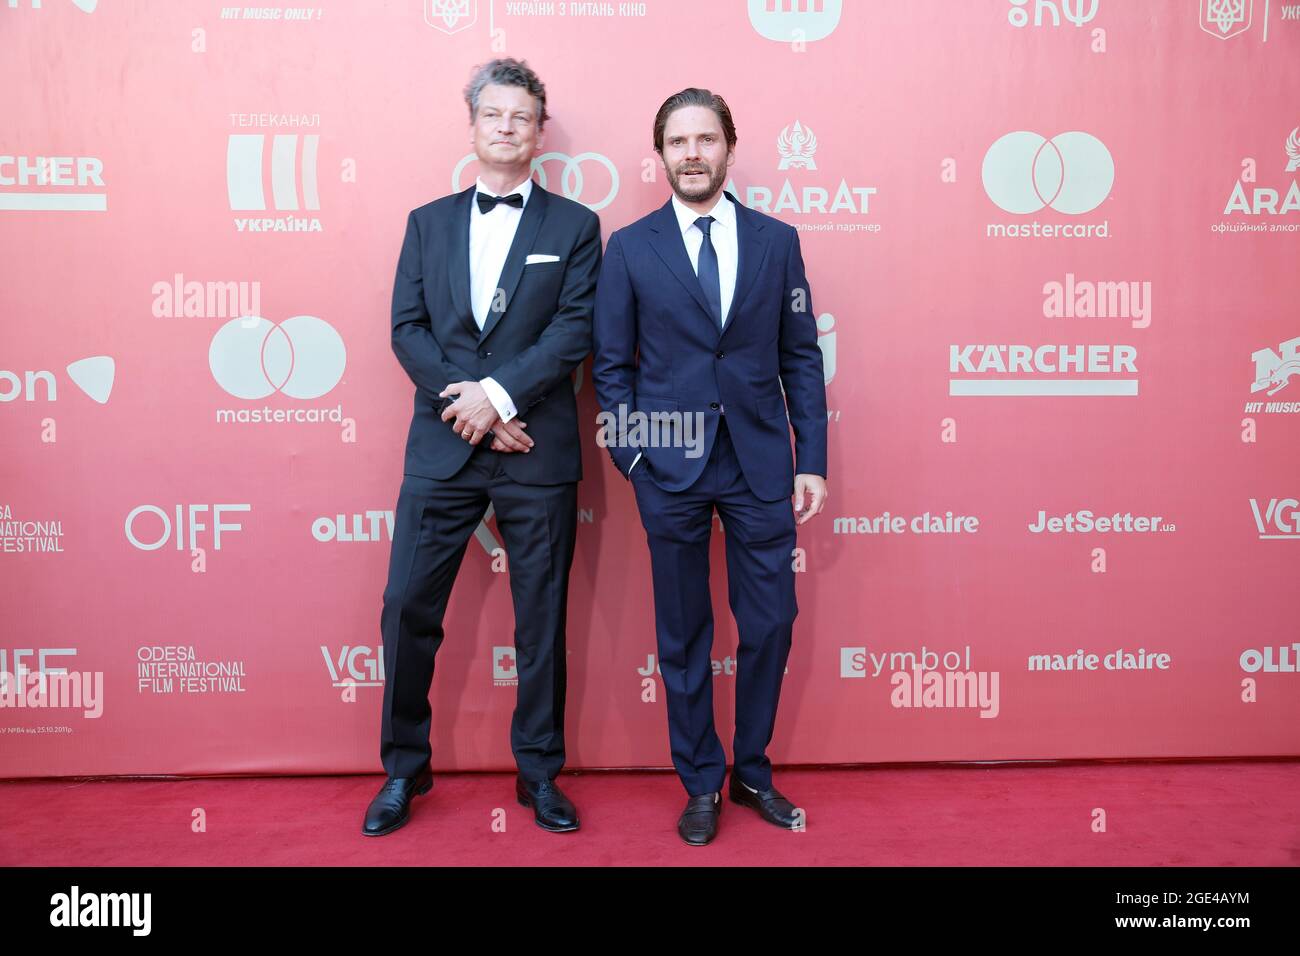 ODESA, UKRAINE - AUGUST 14, 2021 - Spanish-German actor and film director Daniel Bruhl (R) and producer Malte Grunert attend the red carpet event at t Stock Photo